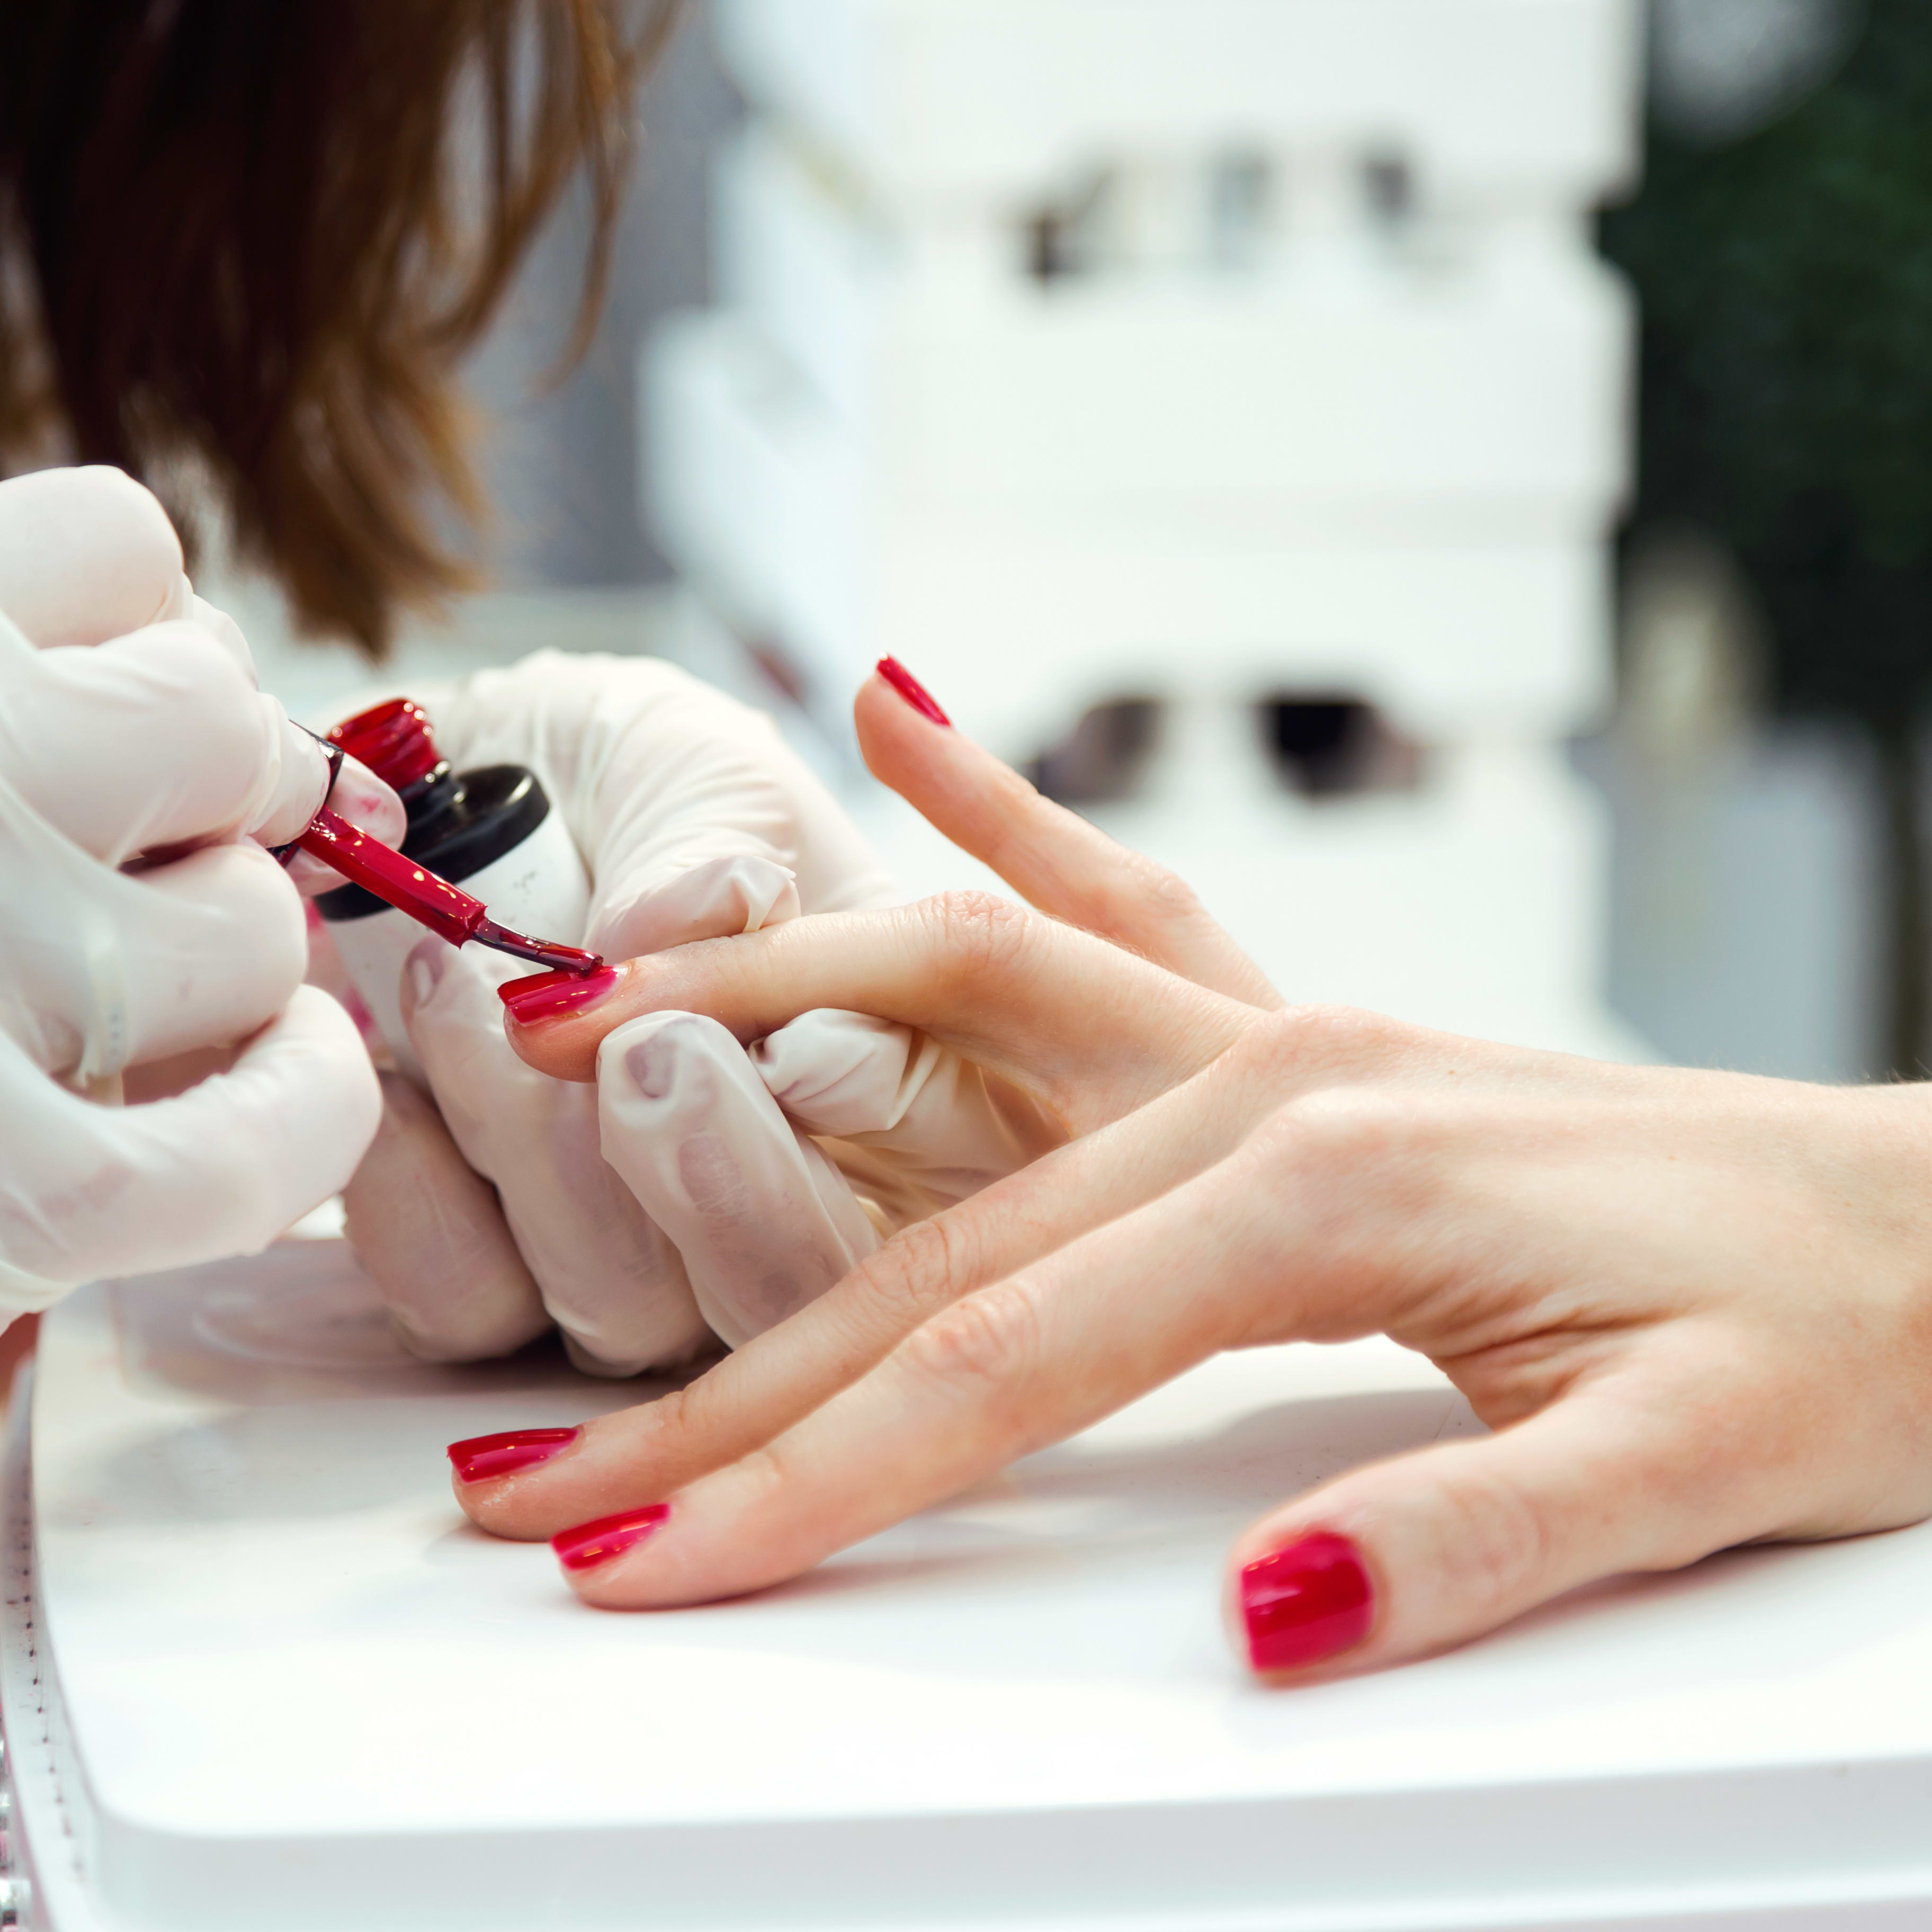 Express Gel Manicure (1 Session) at Be.You.Tiful - Get Deals, Cashback and Rewards with ShopBack GO